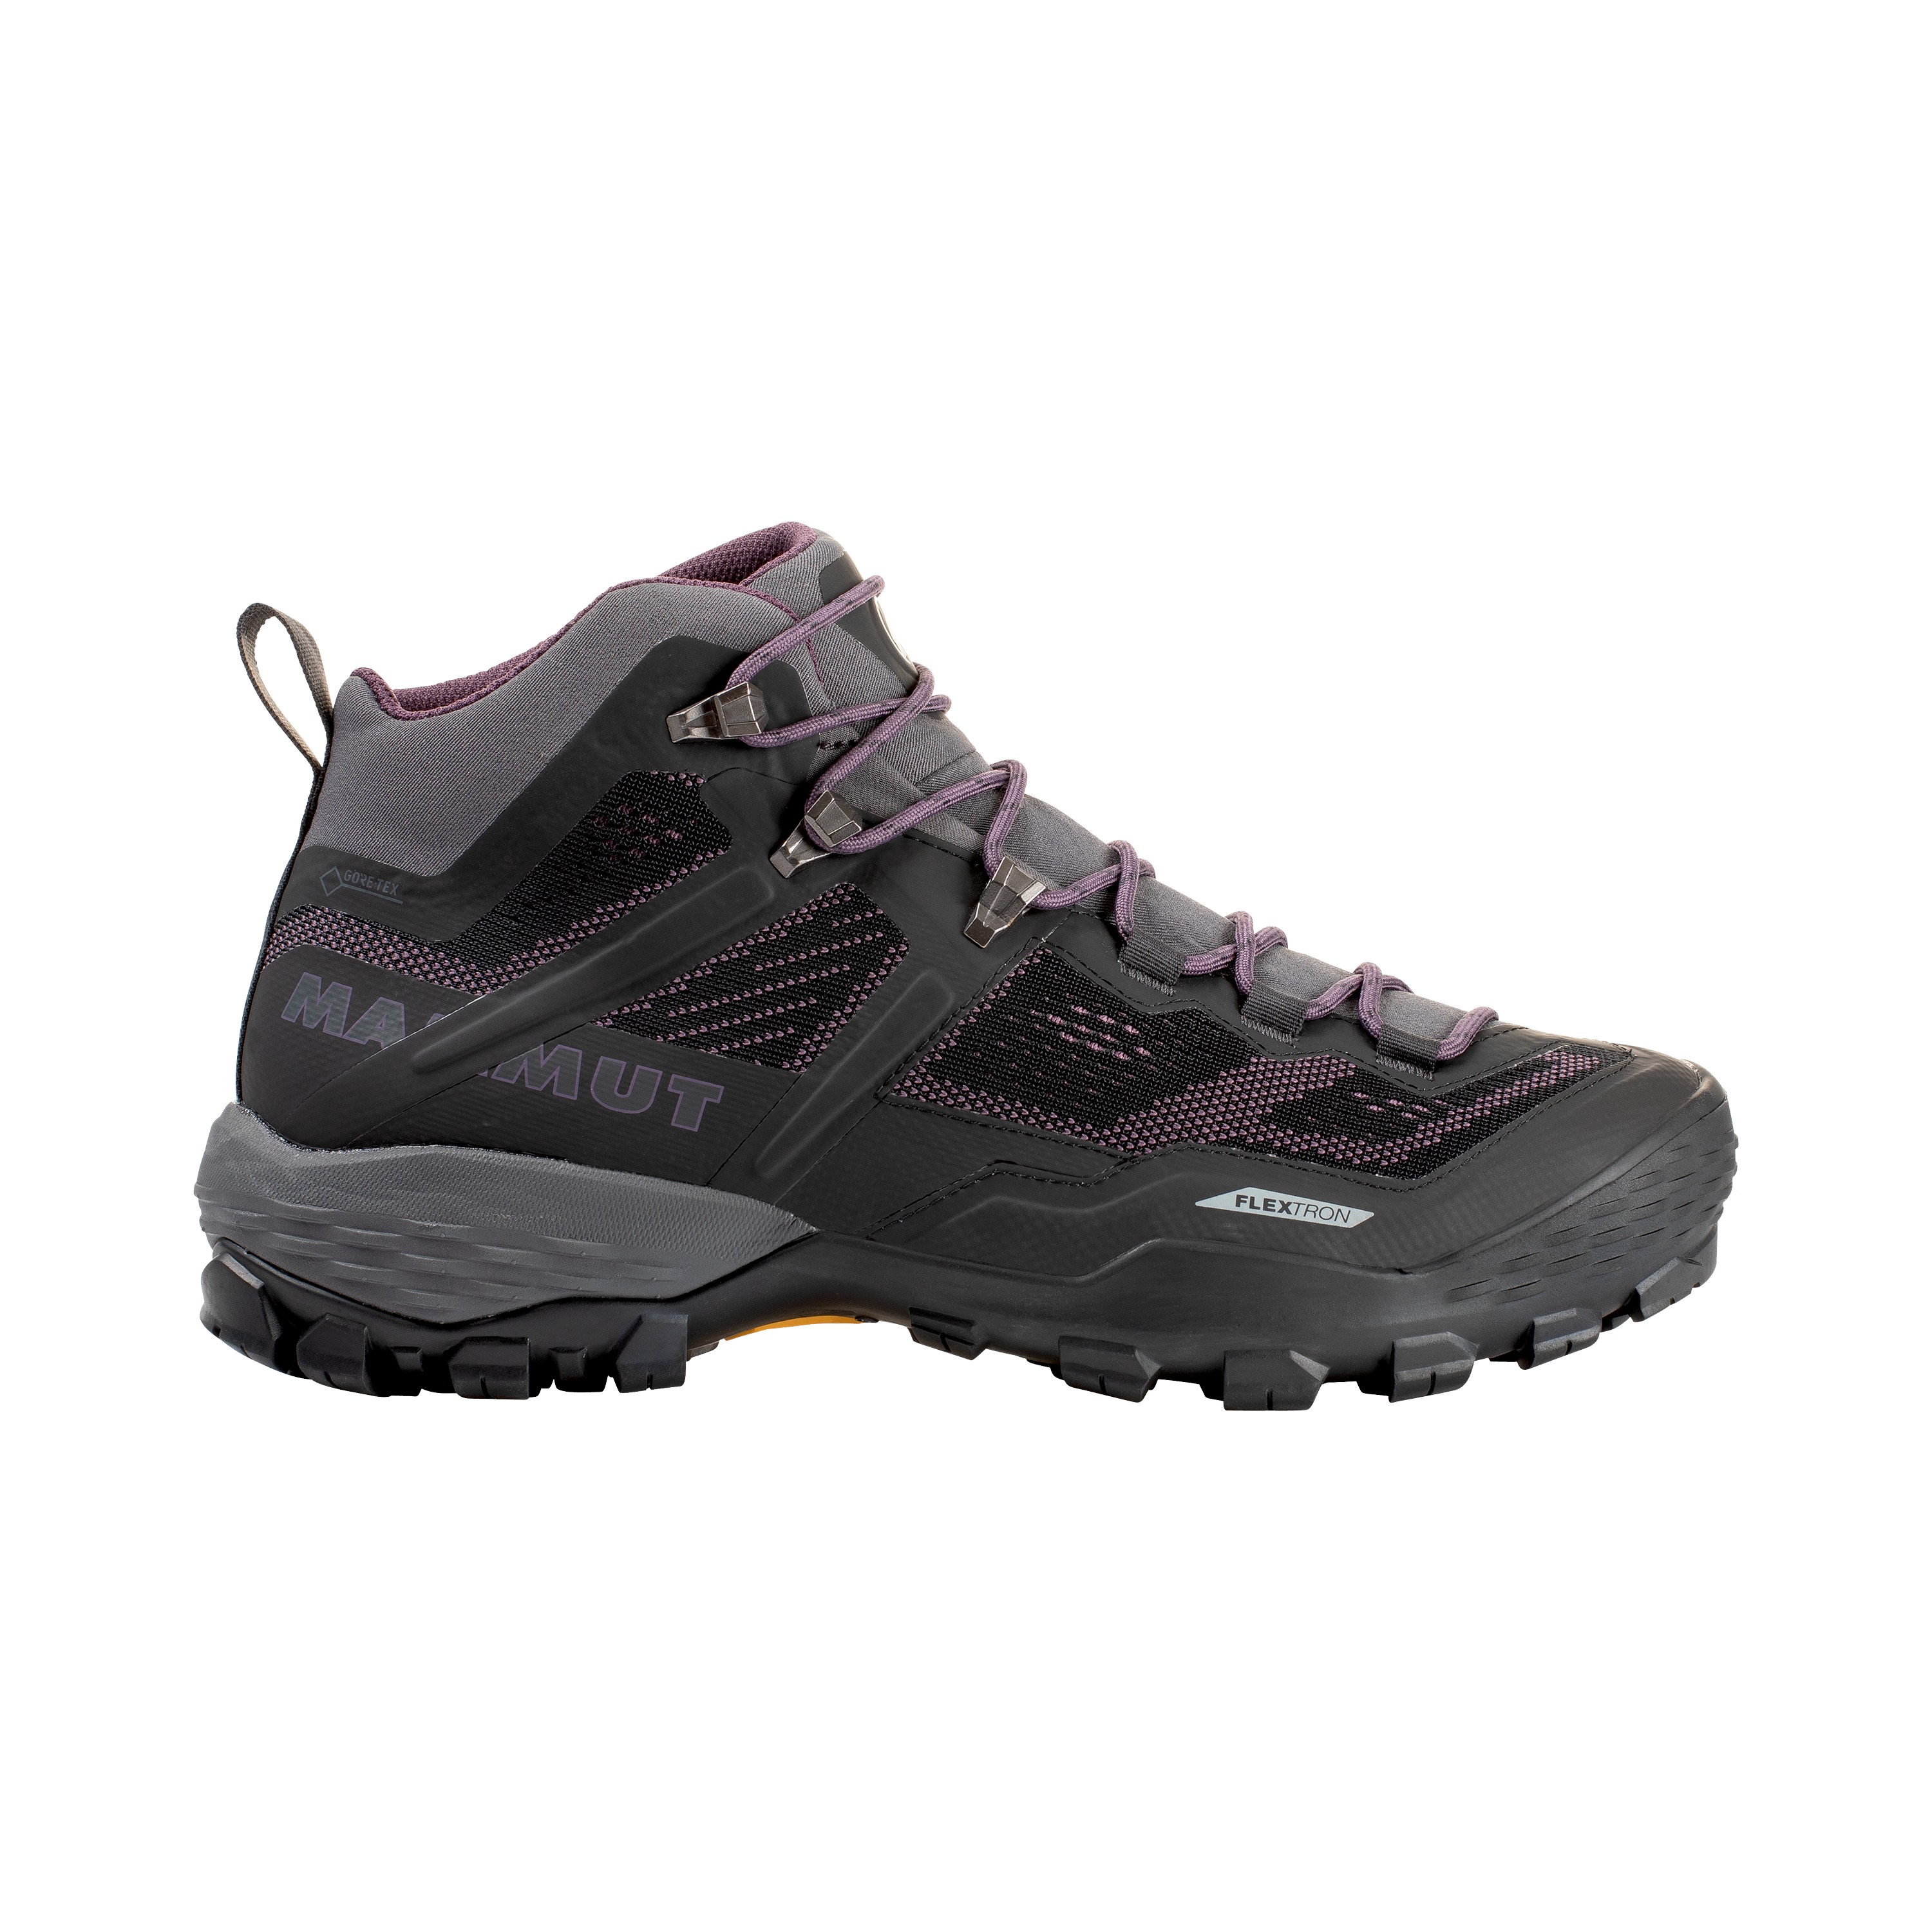 Mammut Ducan Mid GTX Backpacking Shoes - Women's FREE S&H 3030 